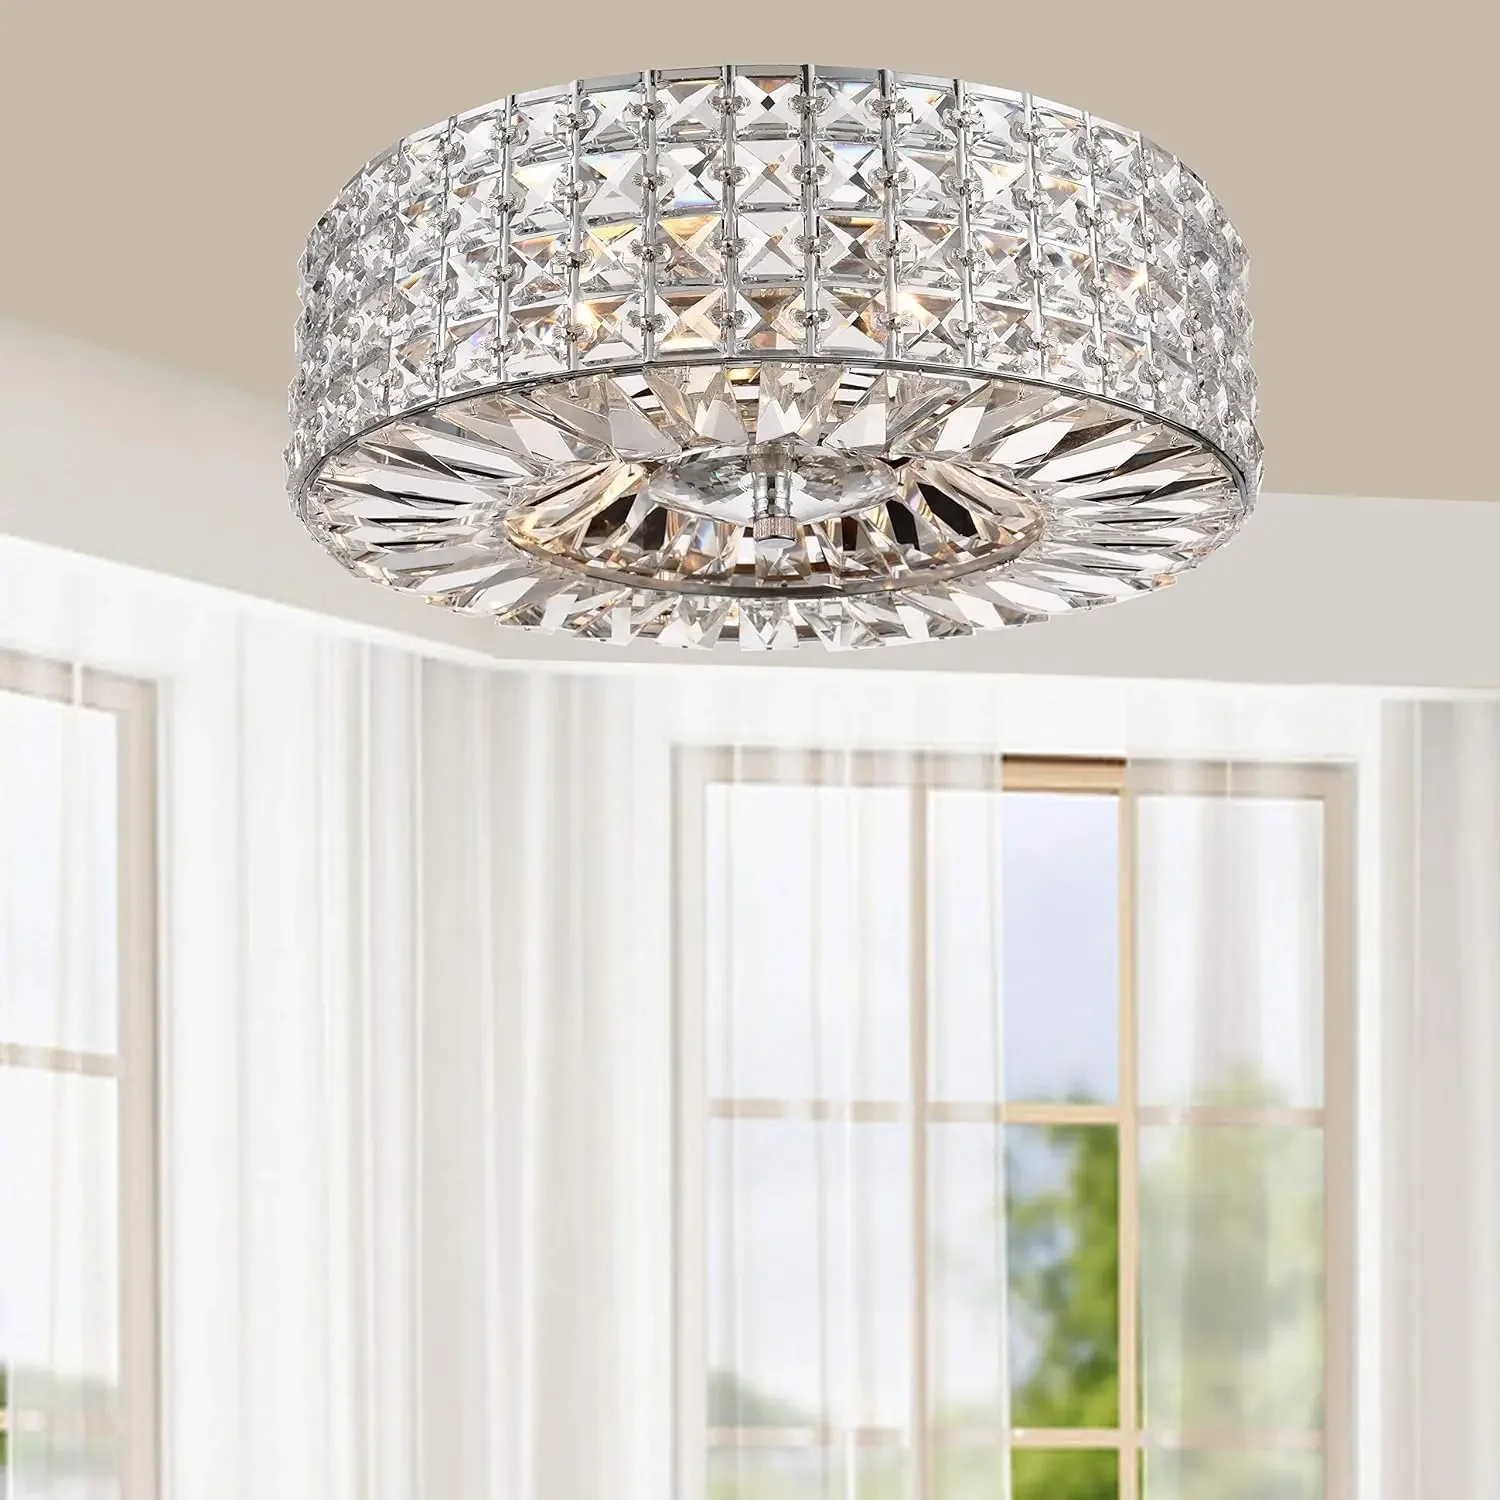 

Chrome Finish 3-Light Crystal and Prism Round Flush Mount - N/a Clear Modern Contemporary Iron